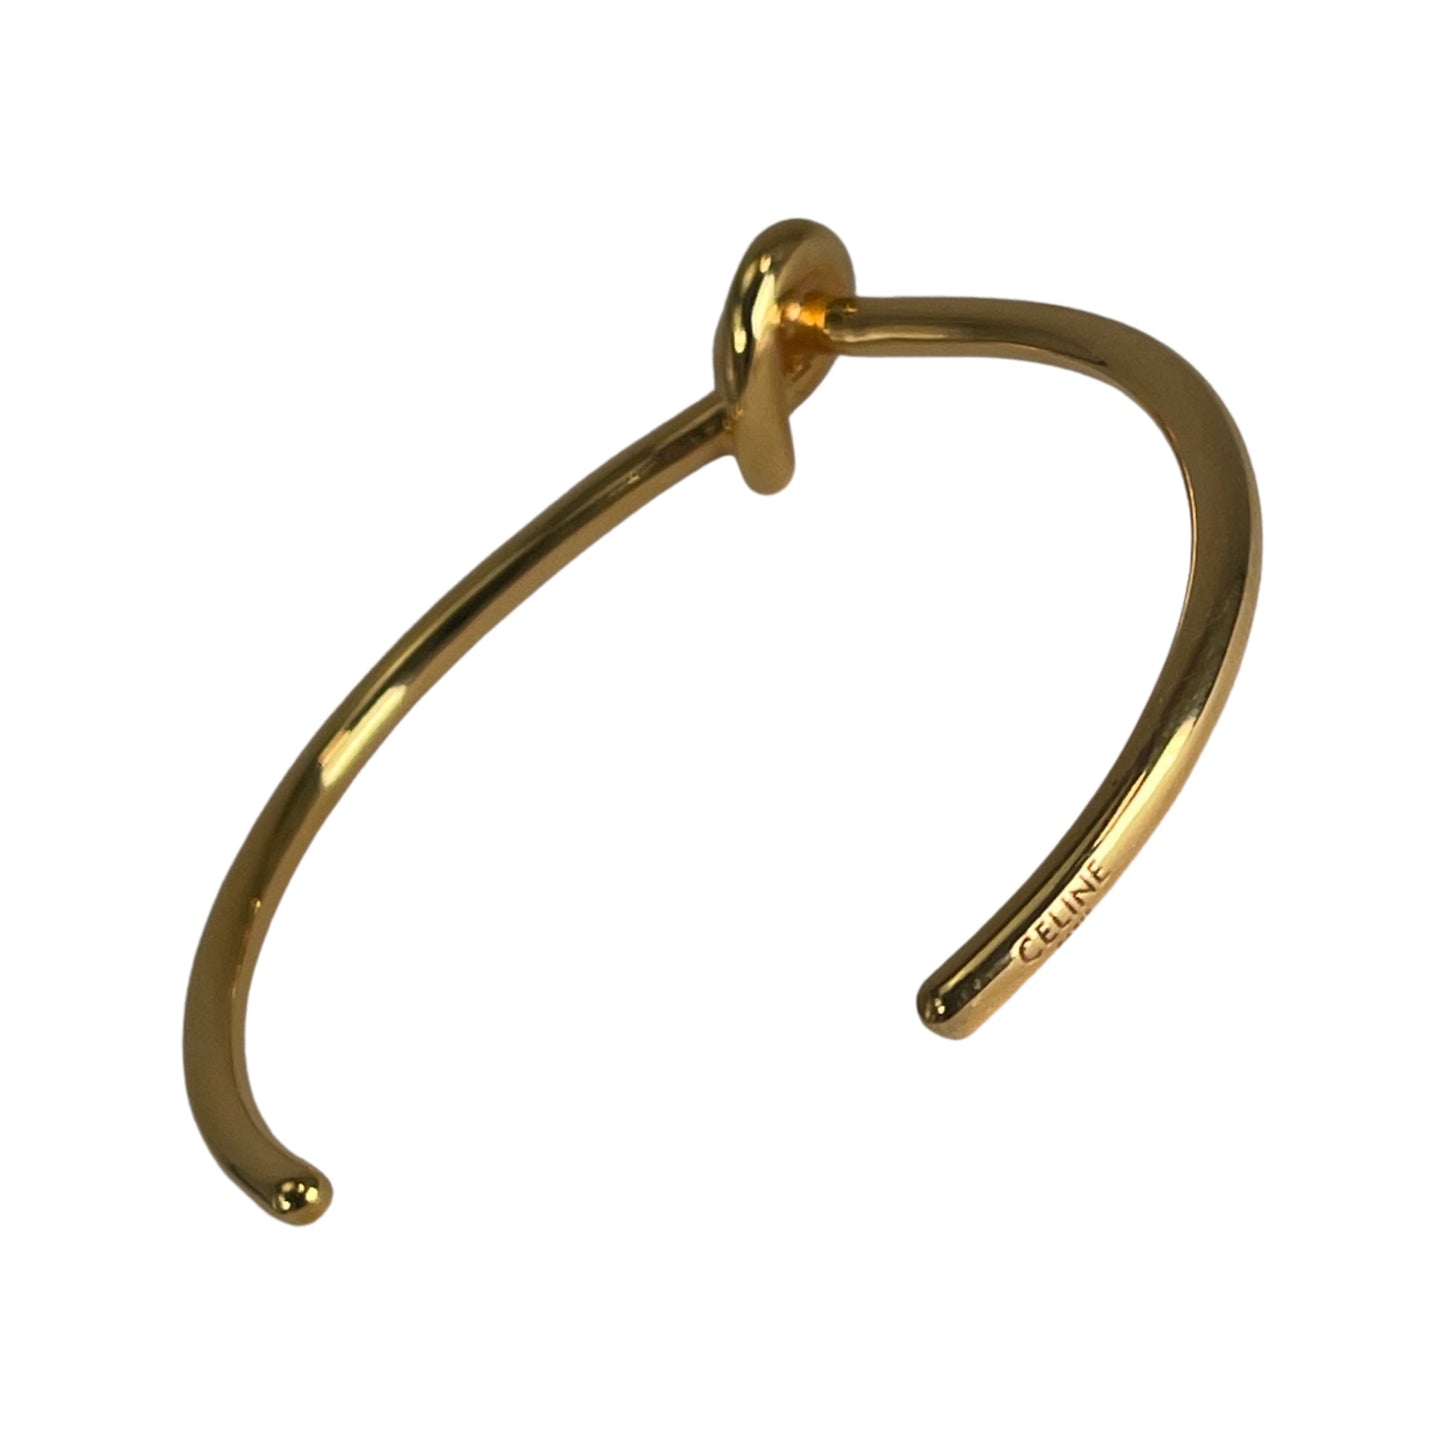 Celine Knot Extra-Thin Bracelet in Brass with Gold Finish